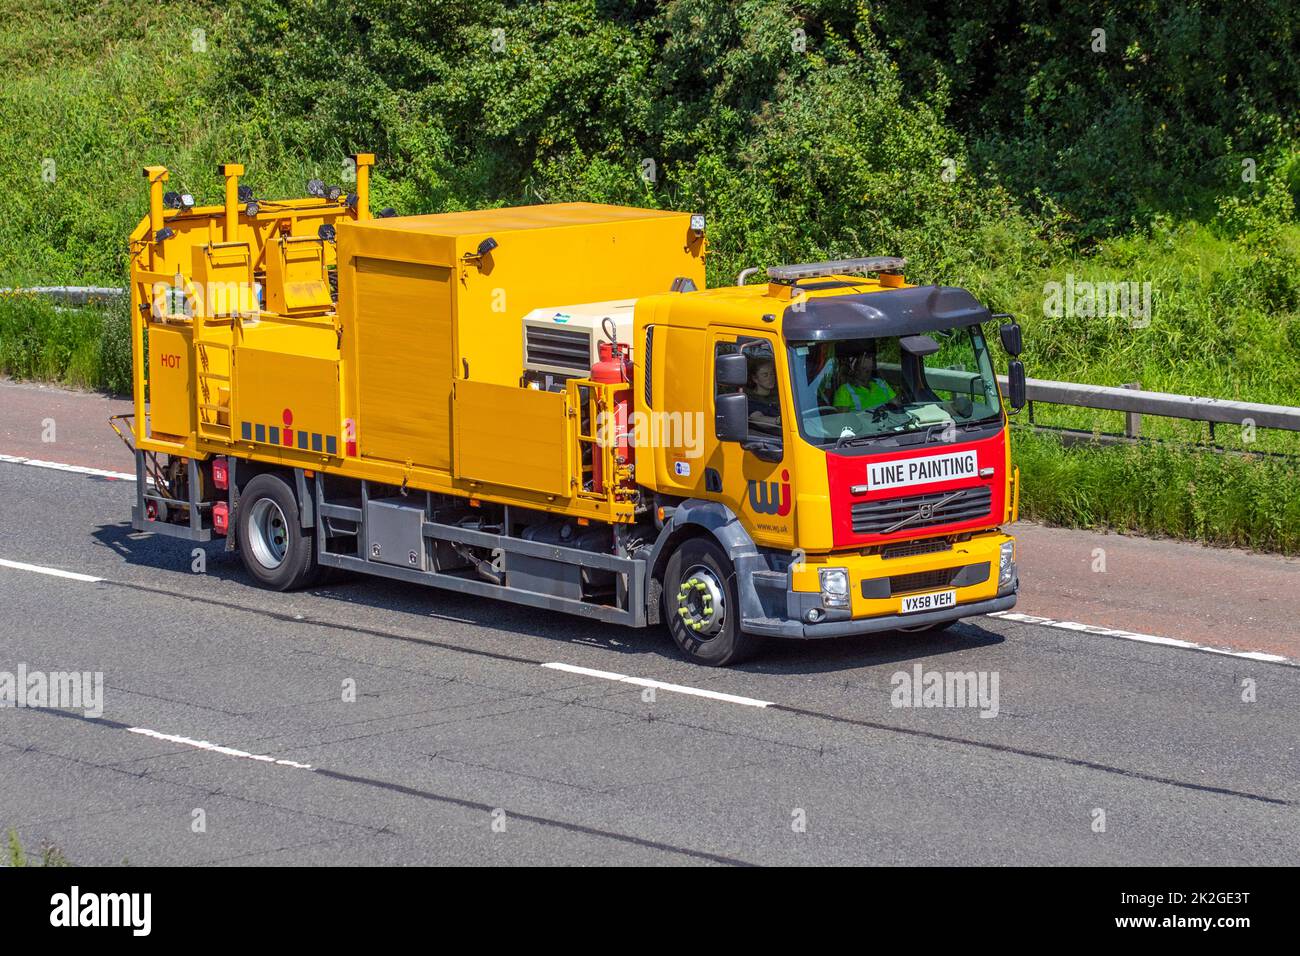 2008 VOLVO LINE PAINTING TRUCK, WJ UK's leading specialist road marking business. Stock Photo